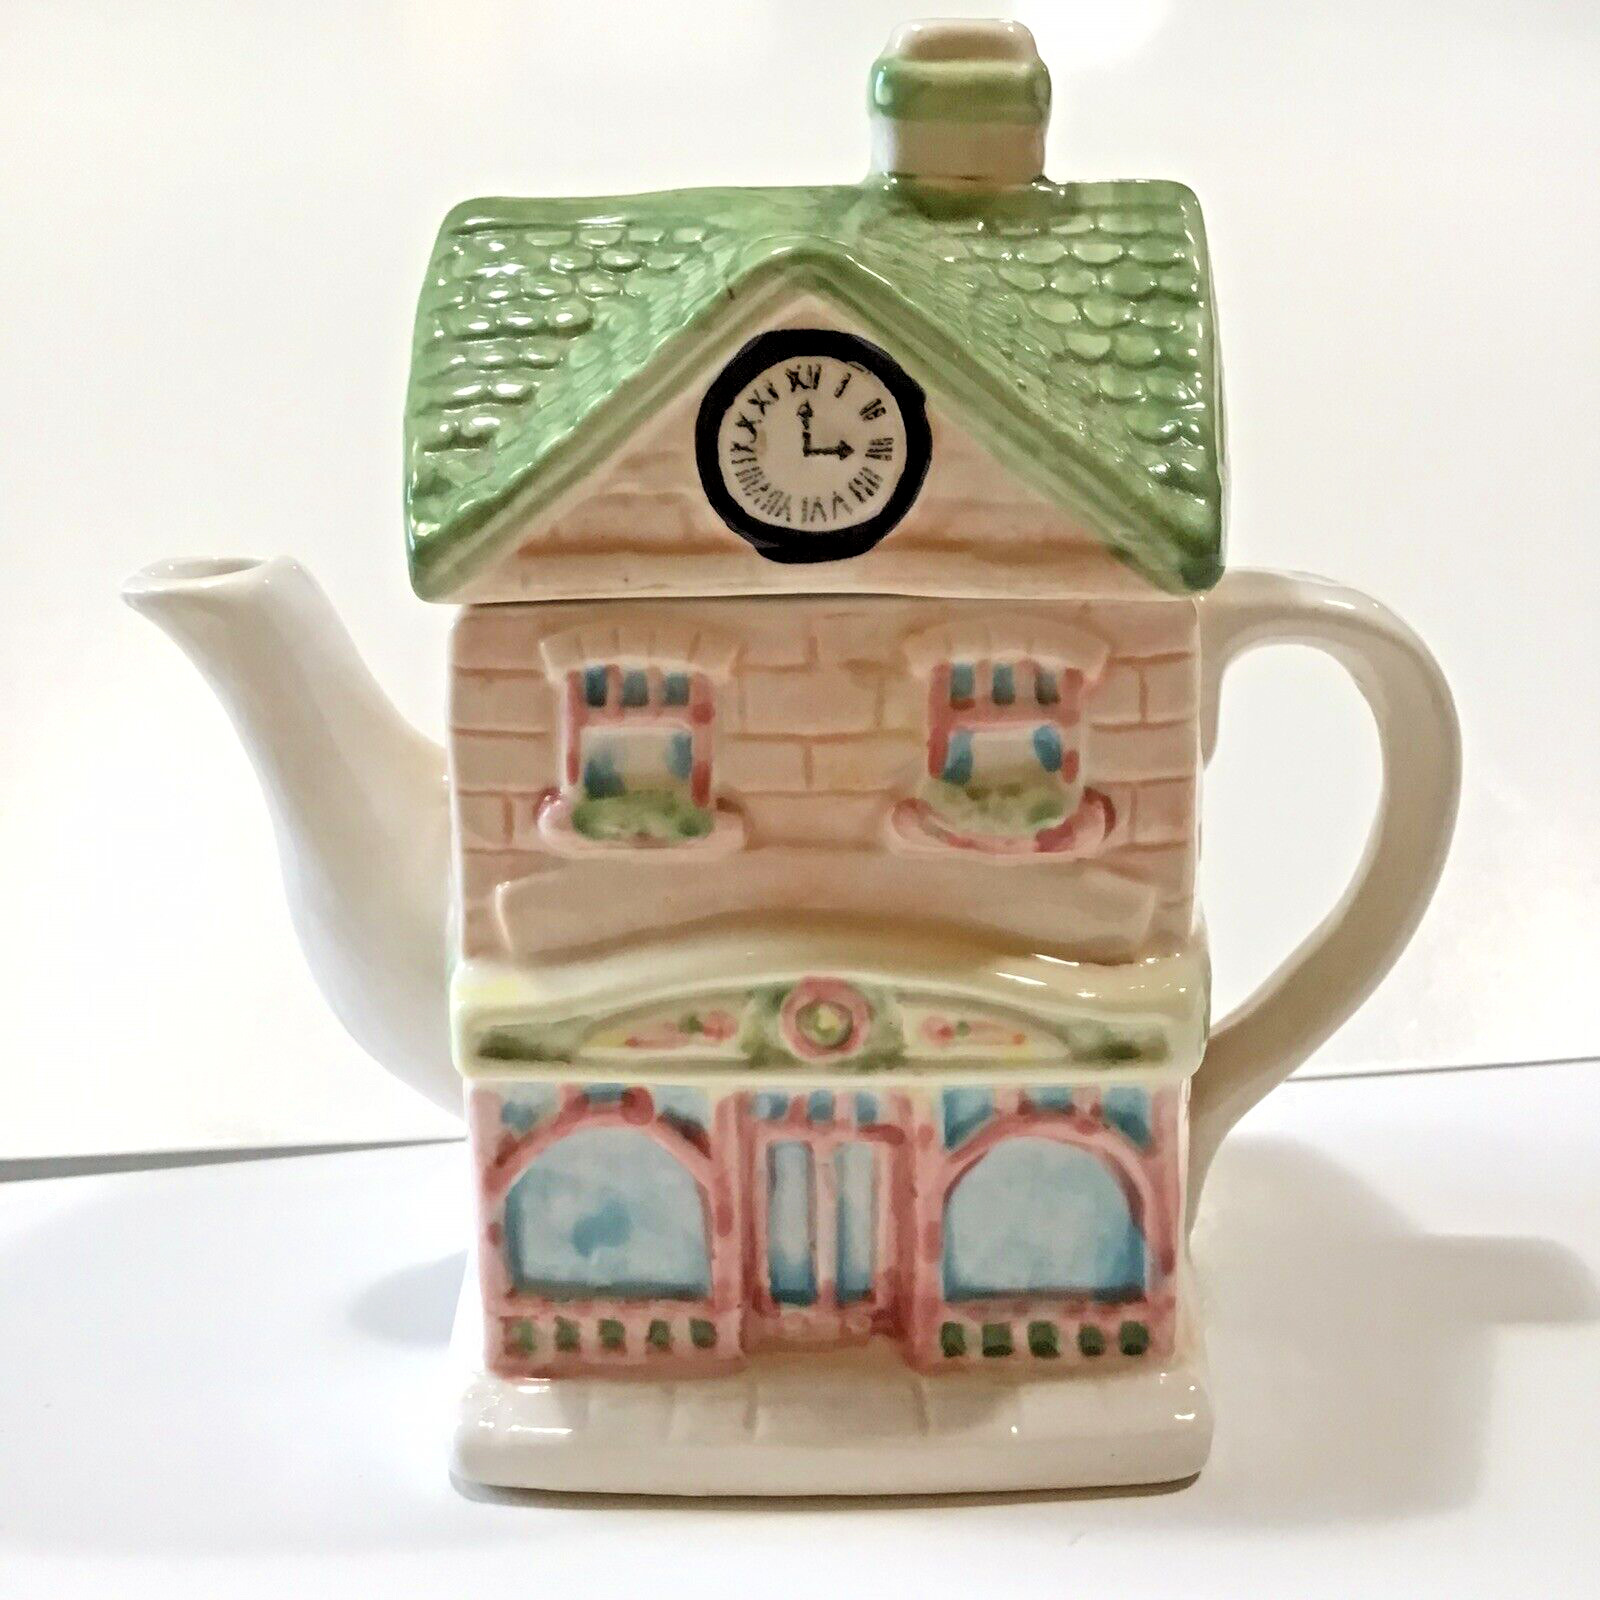 VTG Cottage Shop-Shaped Teapot with Lid Ceramic Country Collectible Pastel